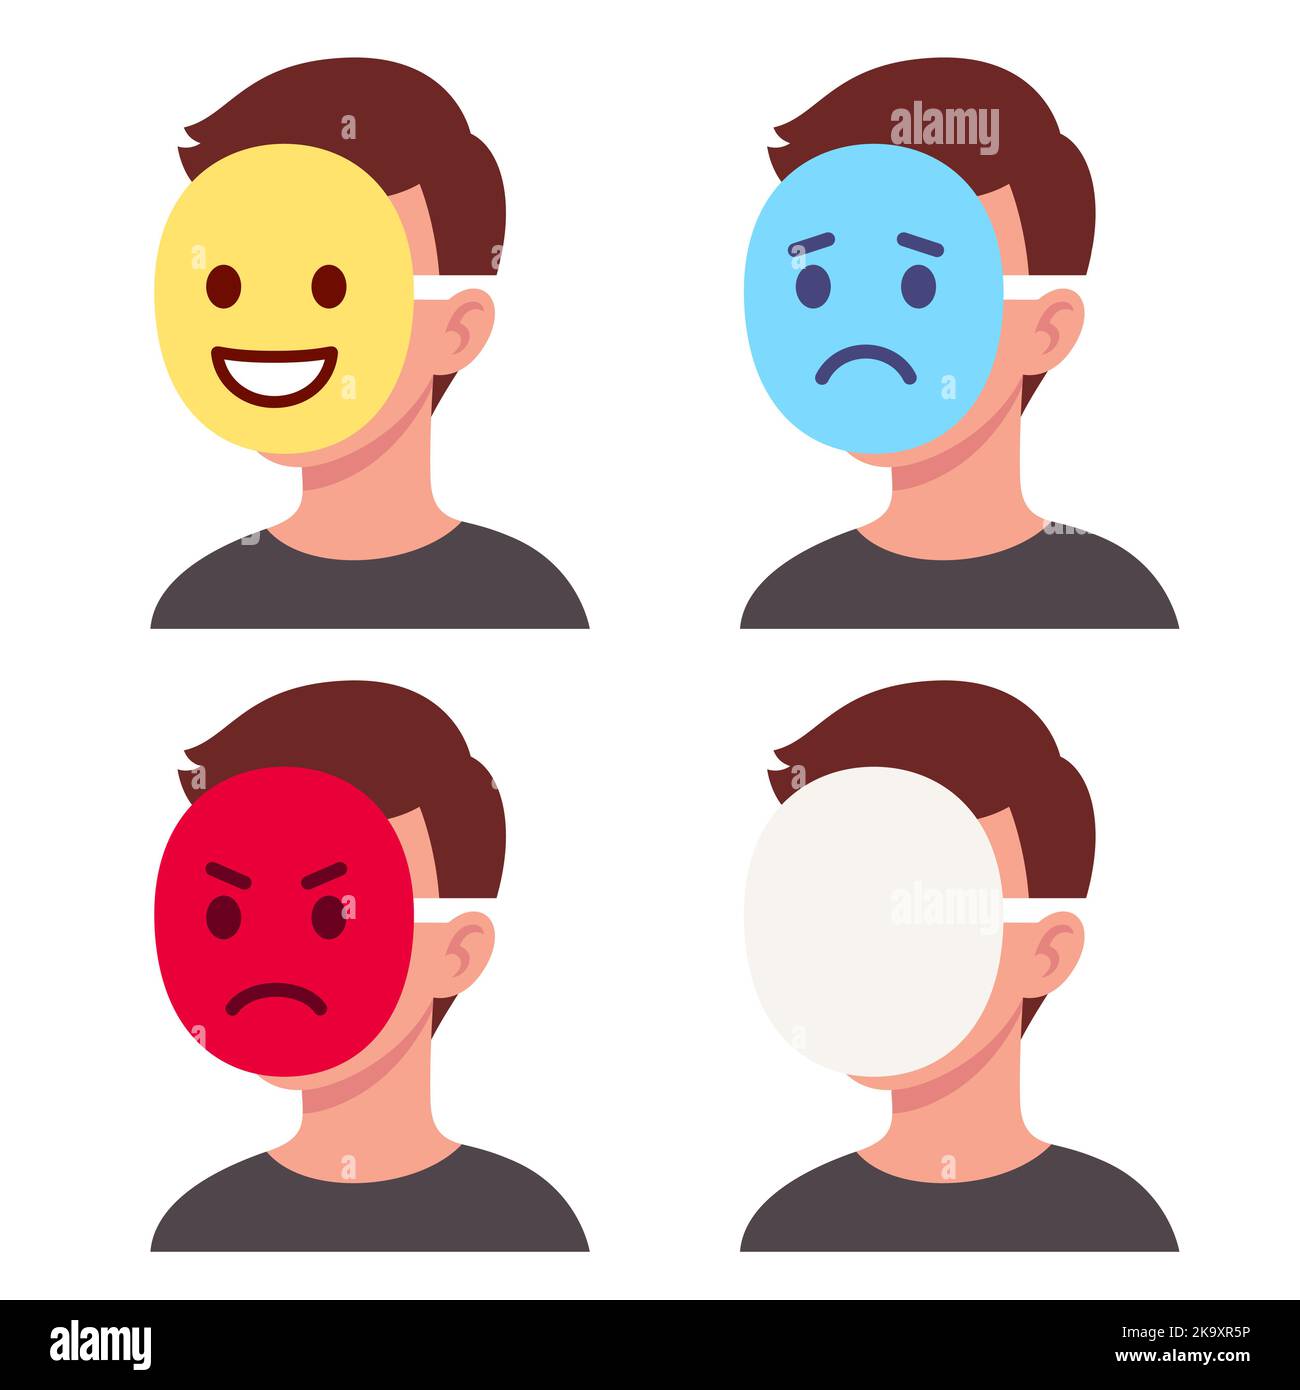 Person with emoji mask covering face, showing emotion through icons. Happy, sad, angry, and blank face. Vector clip art illustration. Stock Vector